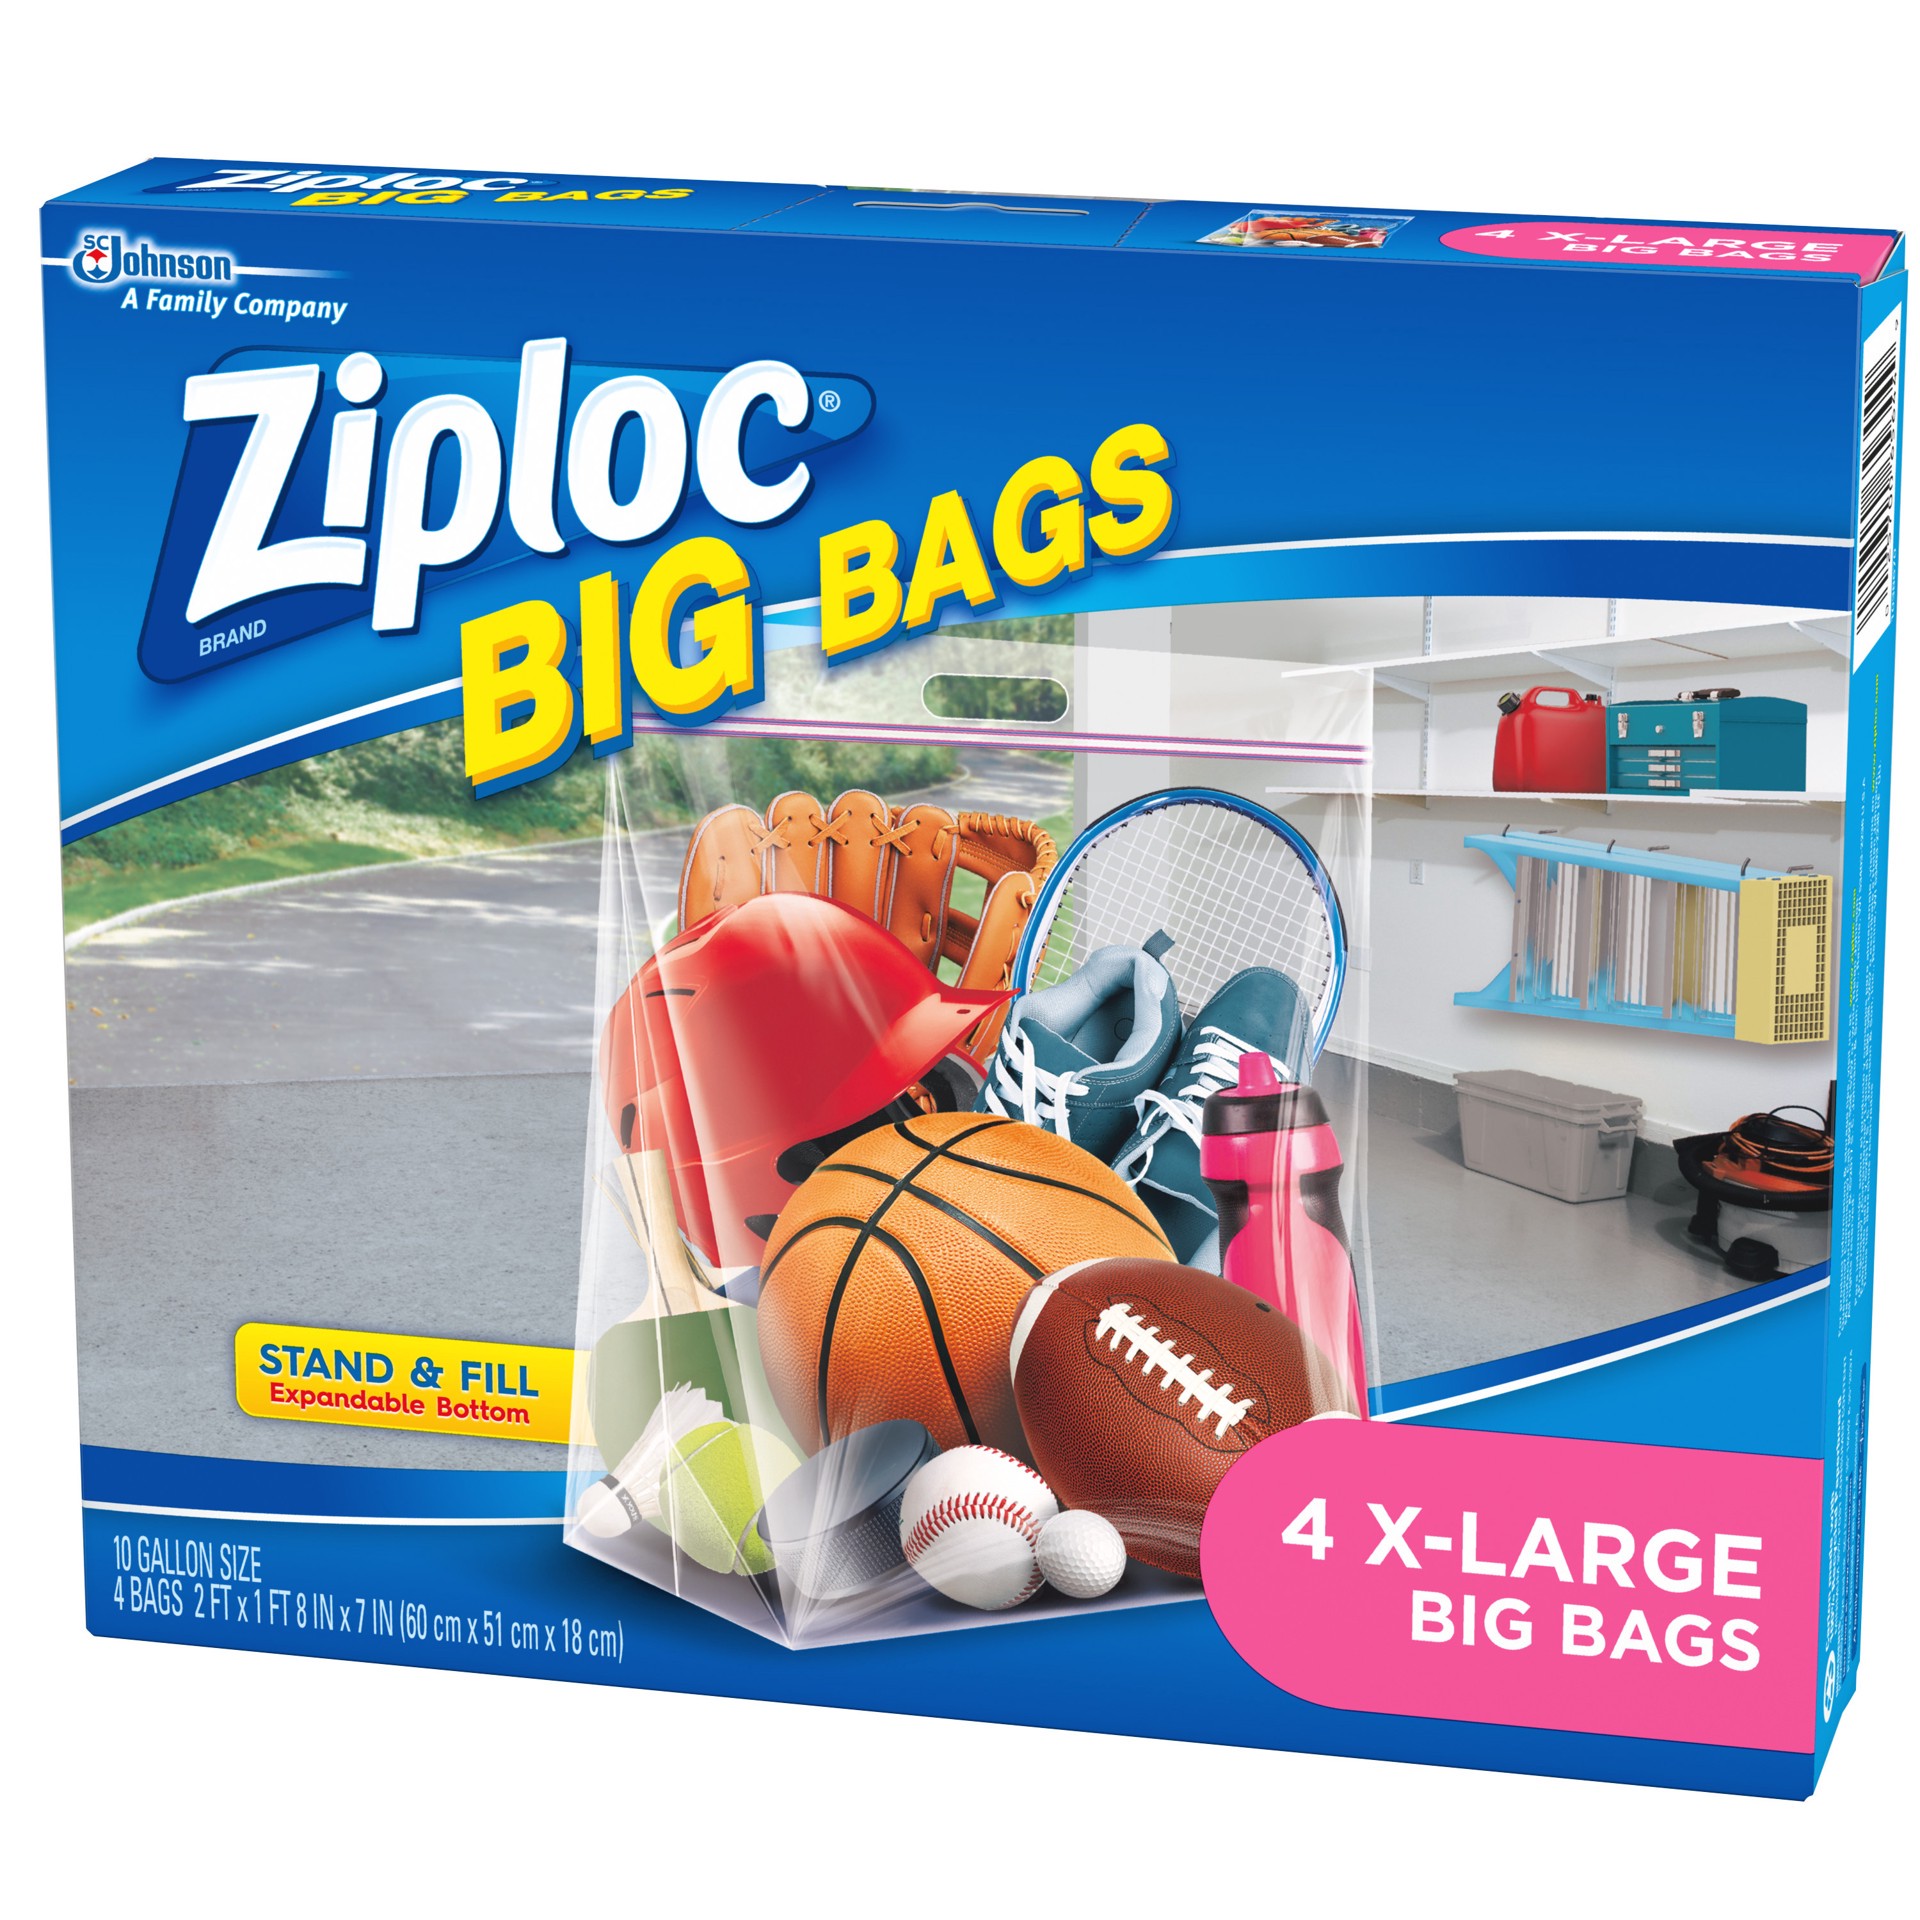 slide 4 of 5, Ziploc Big Bags, X-Large, Secure Double Zipper, 4 CT, Expandable Bottom, Heavy-Duty Plastic, Built-In Handles, Flexible Shape to Fit Where Storage Boxes Can't, 4 ct